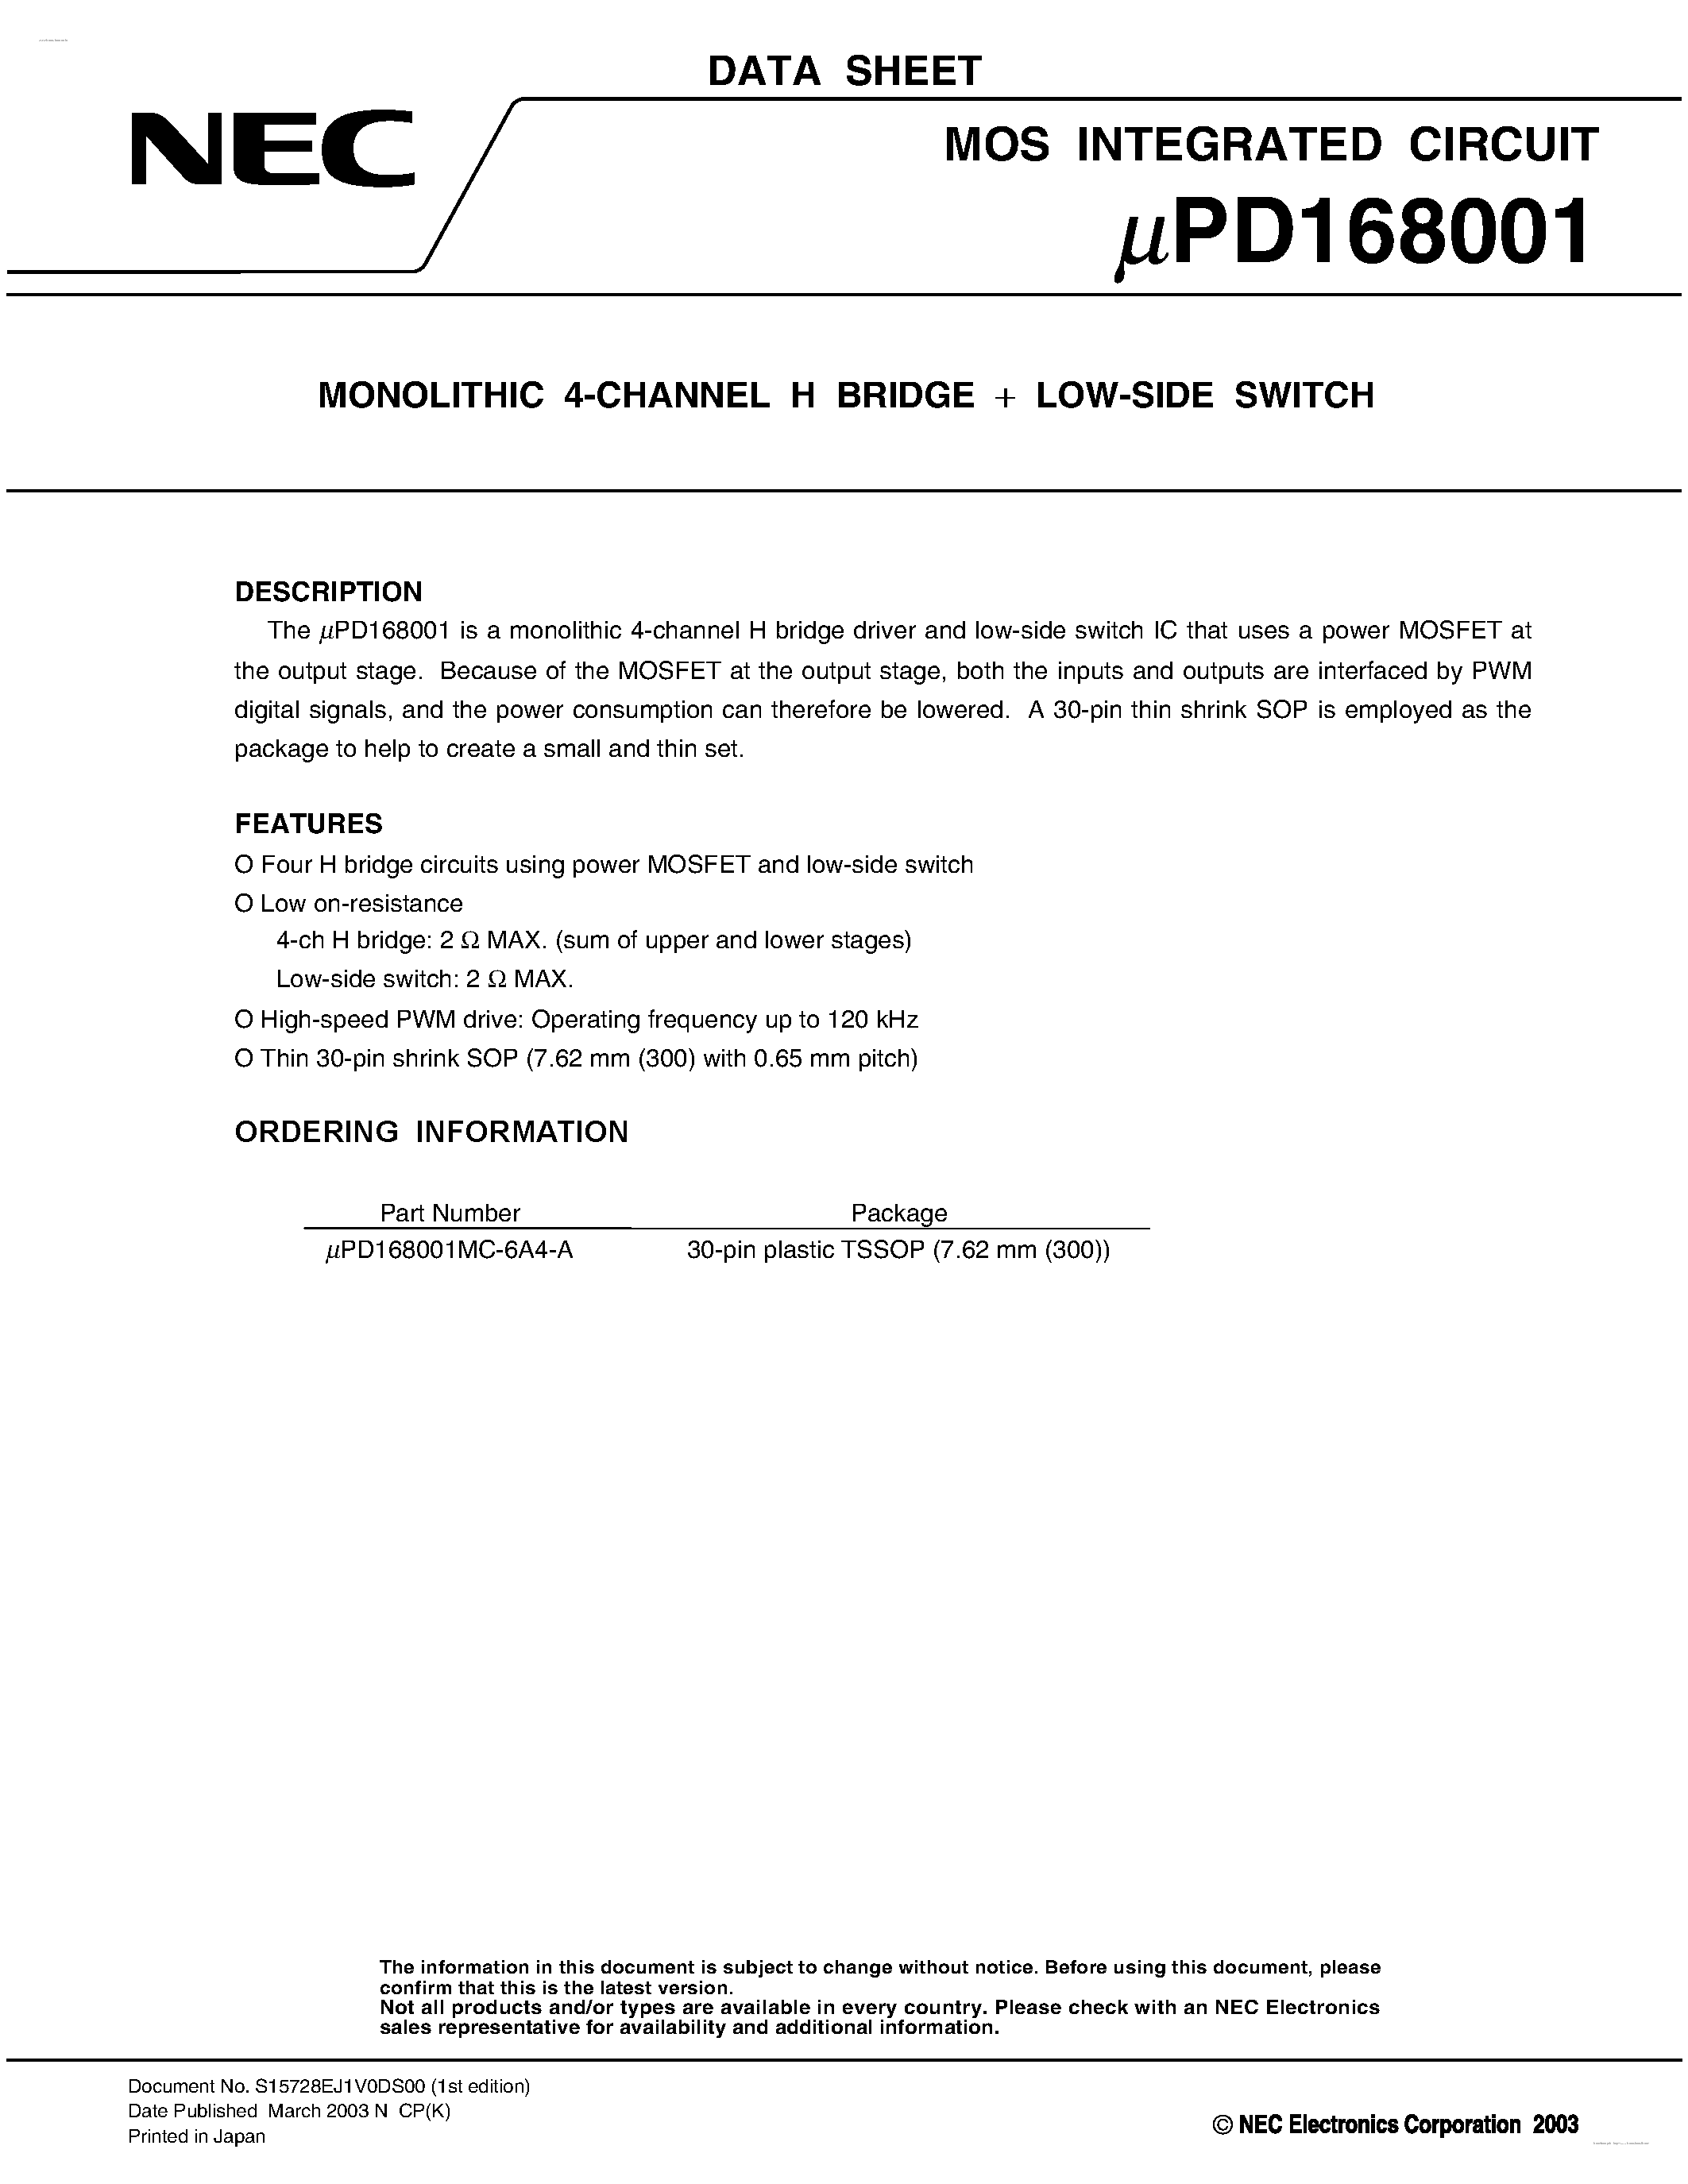 Datasheet UPD168001 - MONOLITHIC 4-CHANNEL H BRIDGE LOW-SIDE SWITCH page 1